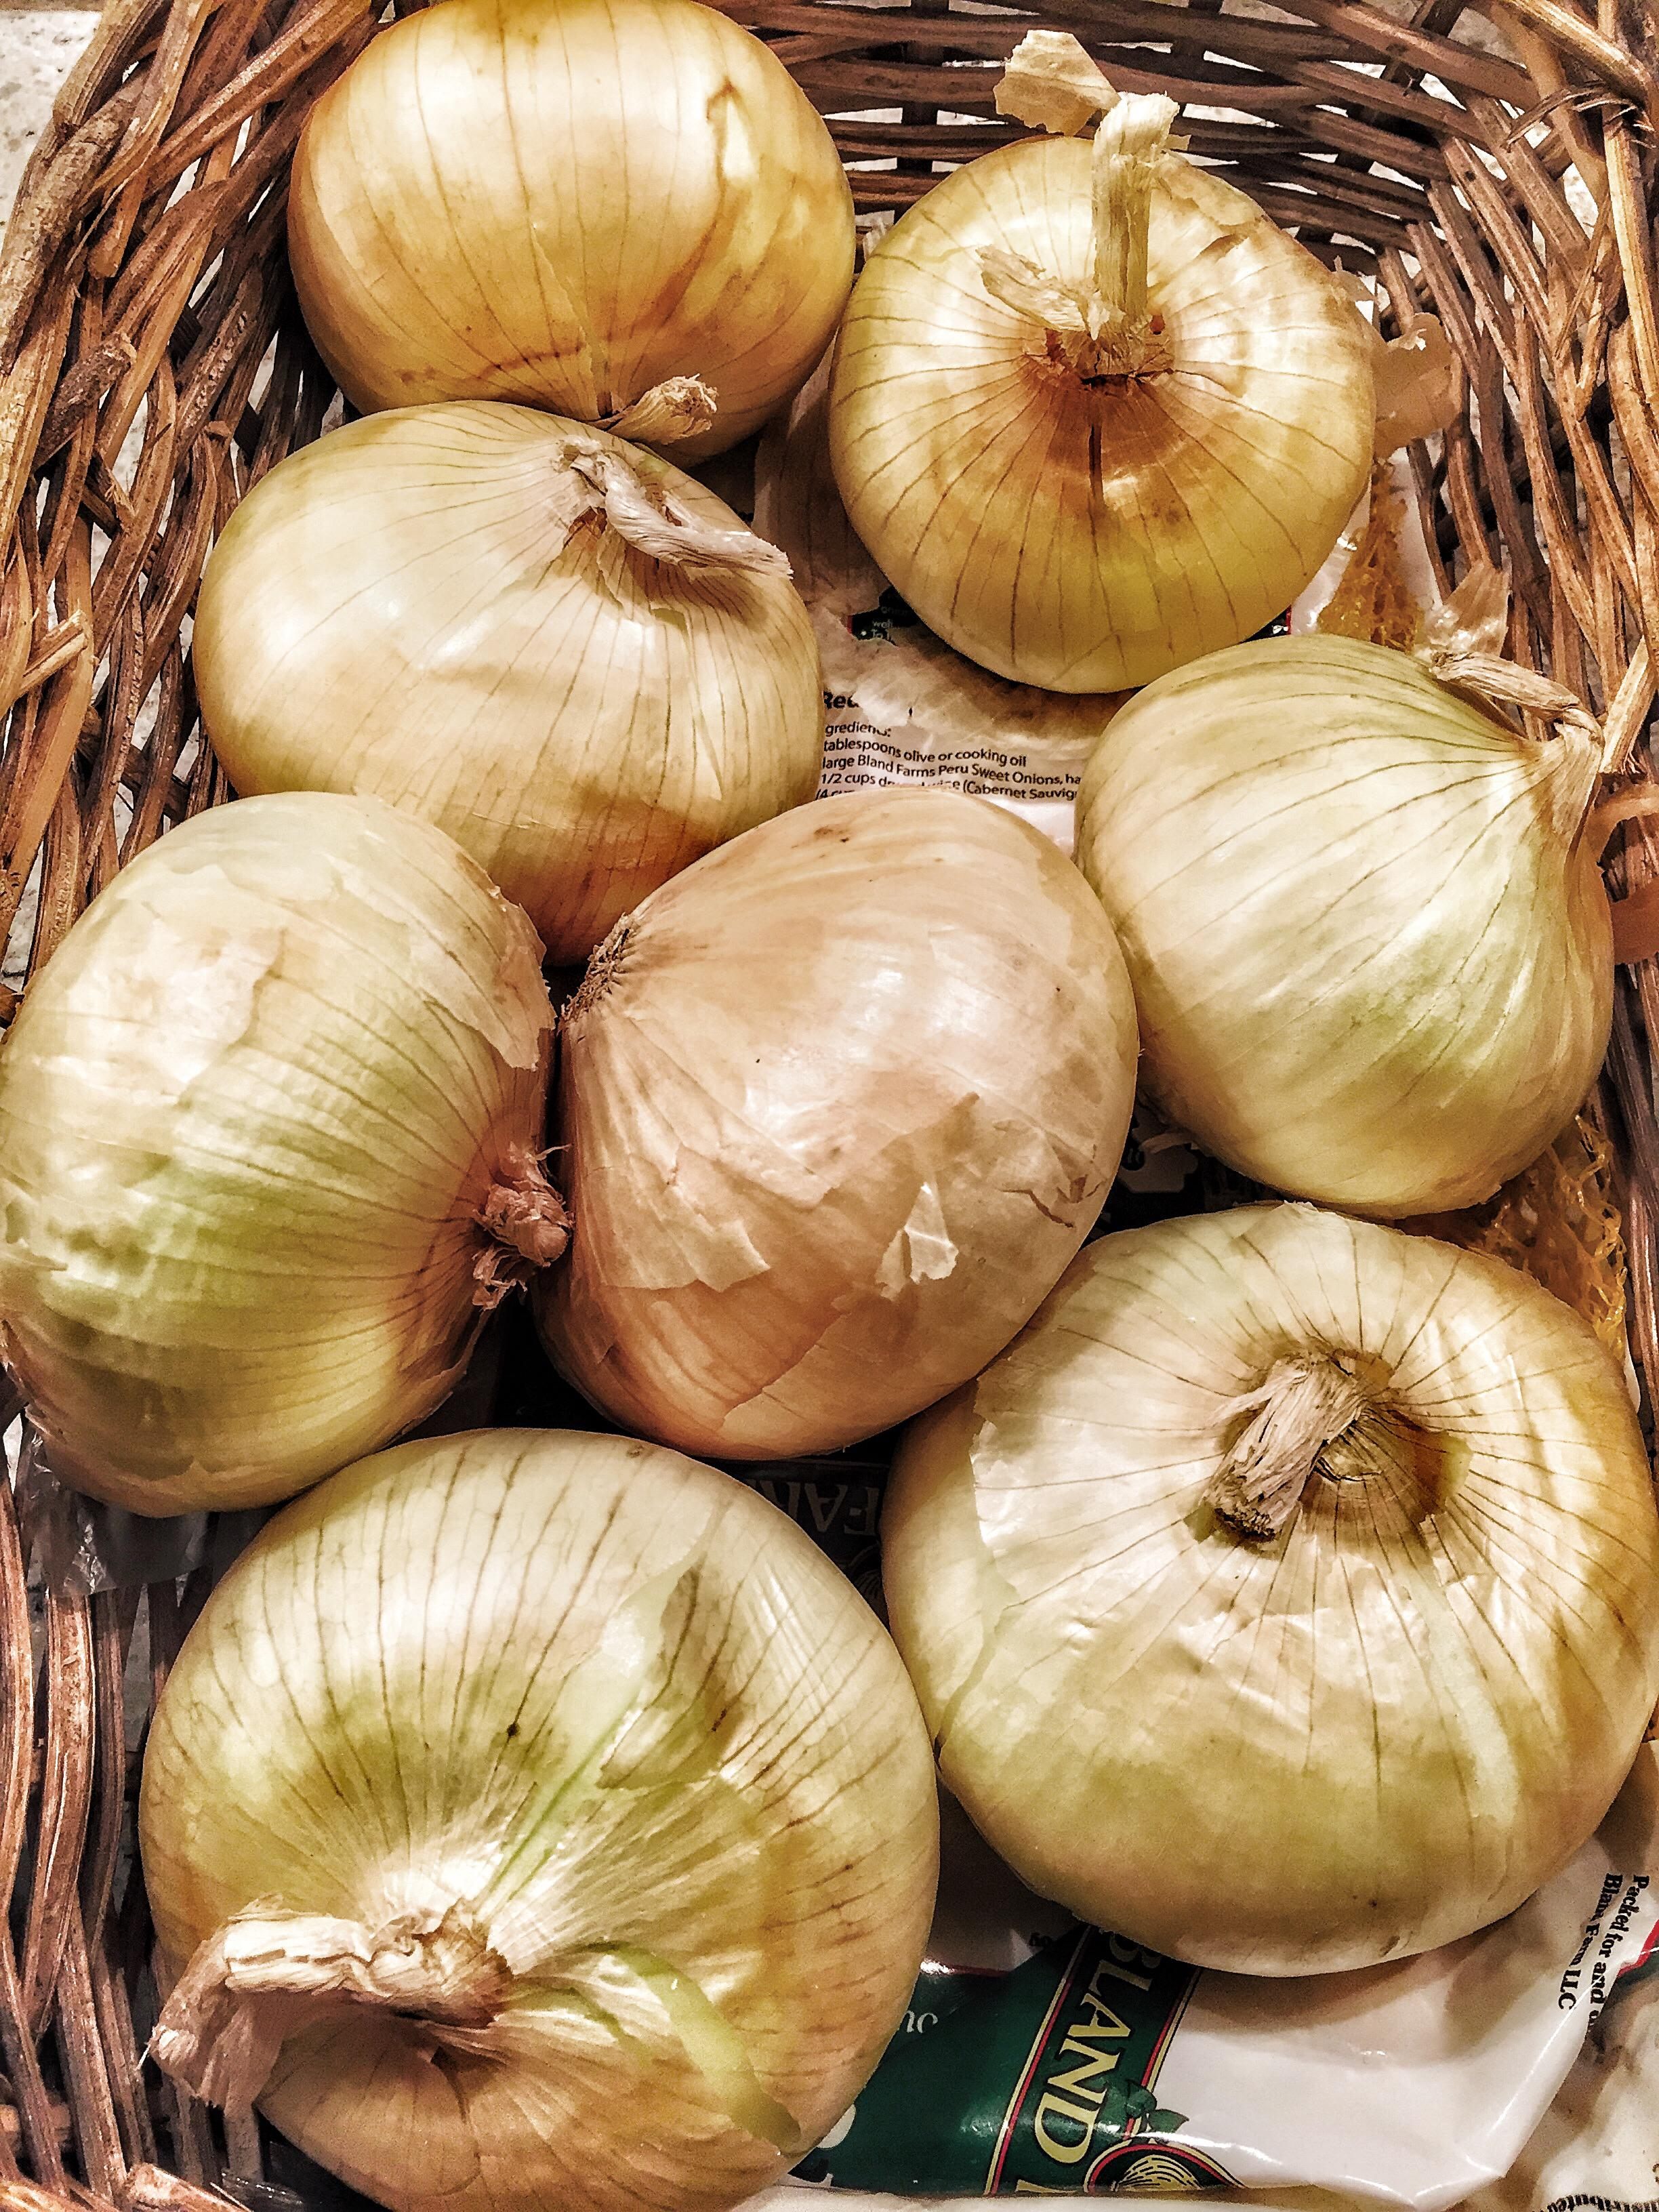 The Vidalia is a hybrid of the Granex onion, pictured here.